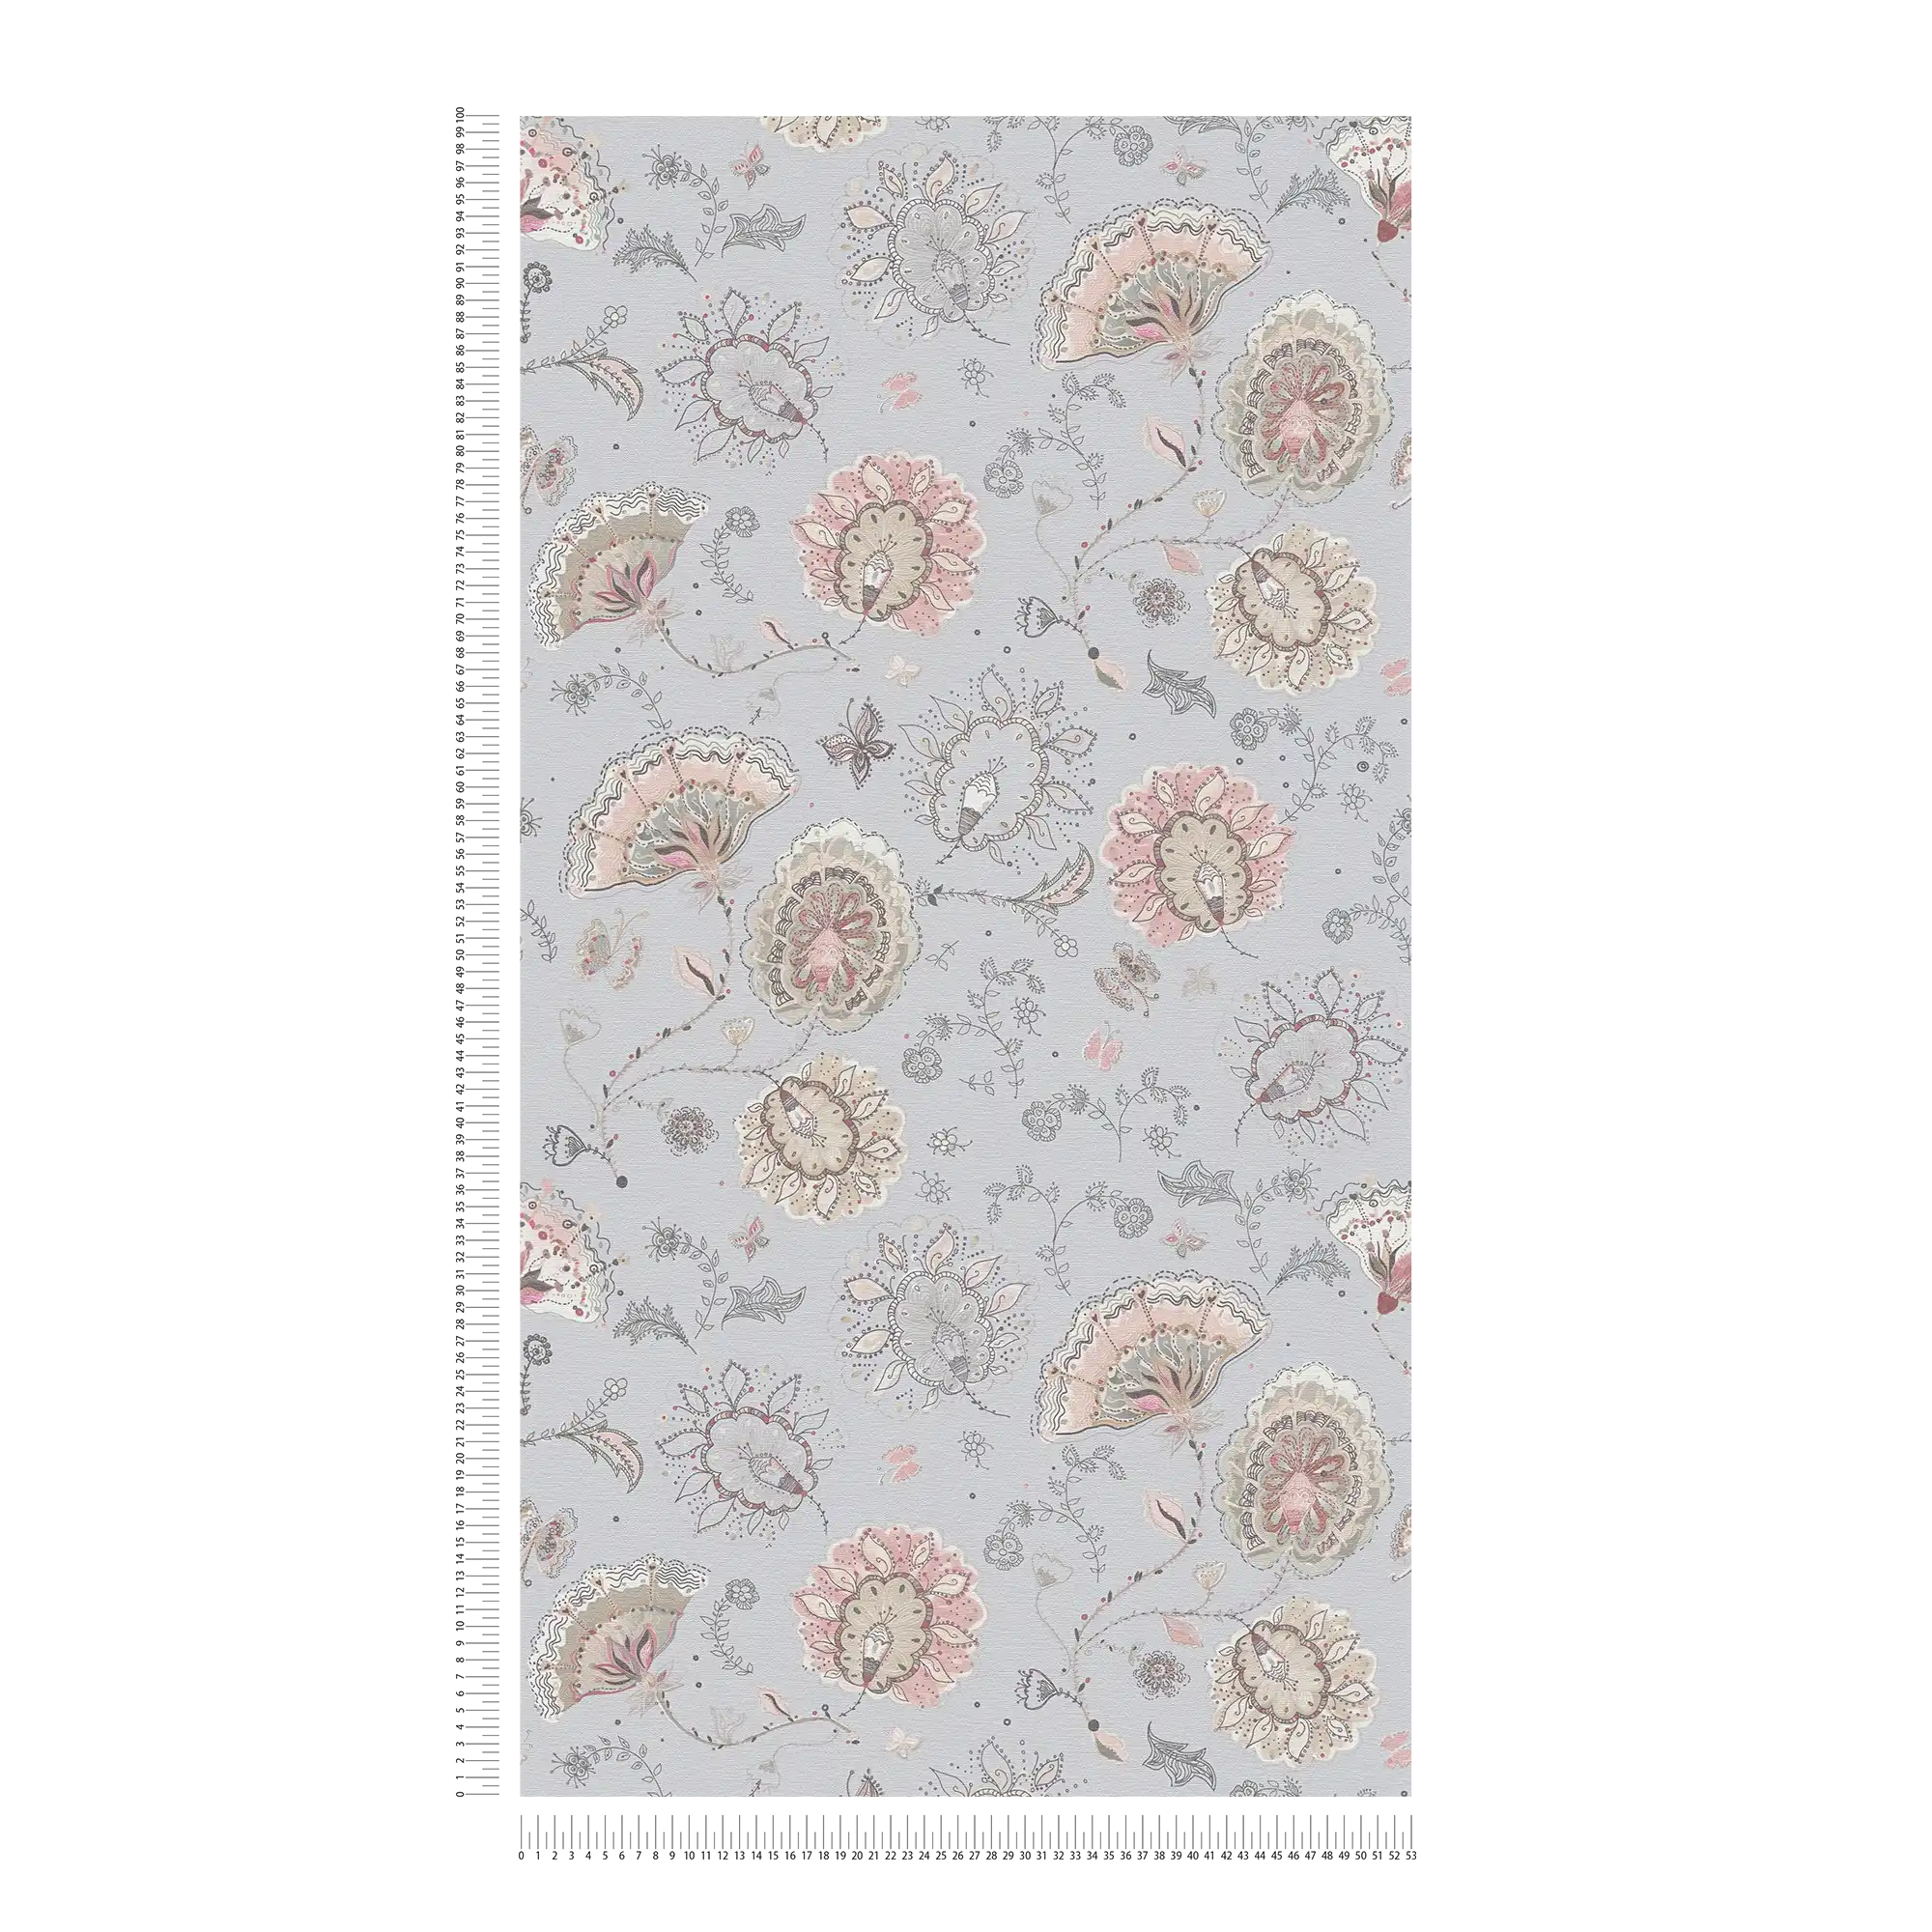             Non-woven wallpaper with abstract floral pattern fine structure - grey, beige, cream
        